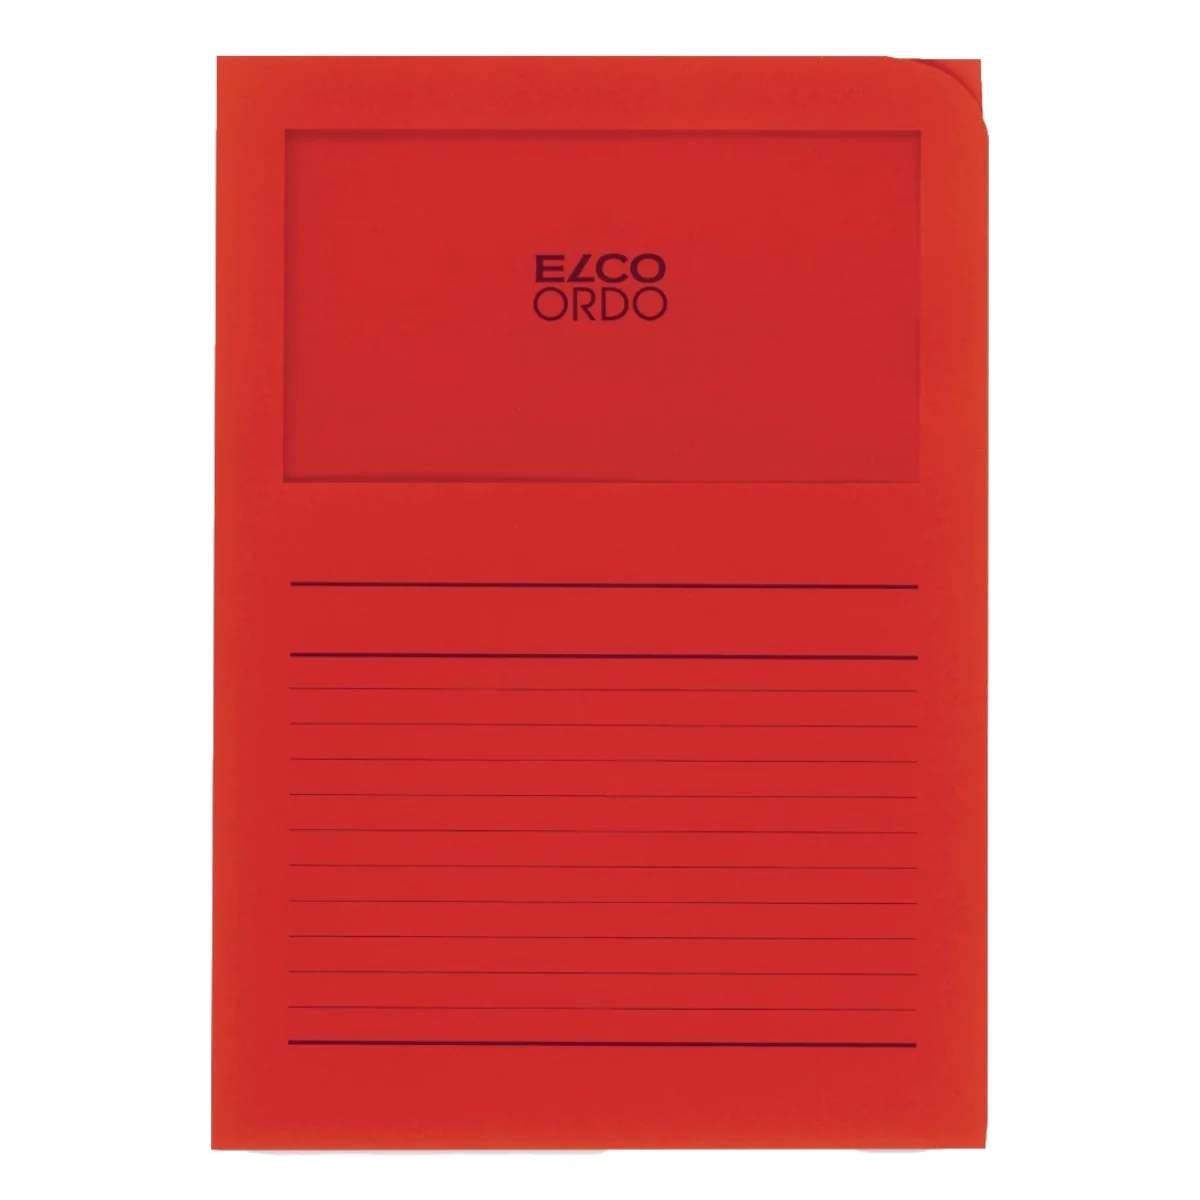 Ordo Classico Elco Switzerland suitable for needs at home and in the office Paper file folder, 120 gsm, 220 x 310 mm. 180 x 100 mm window Inkjet compatible ELCO Ordo 5/pack Red 29489-92stationery shops in dubai mall office supply uae cute stationery online